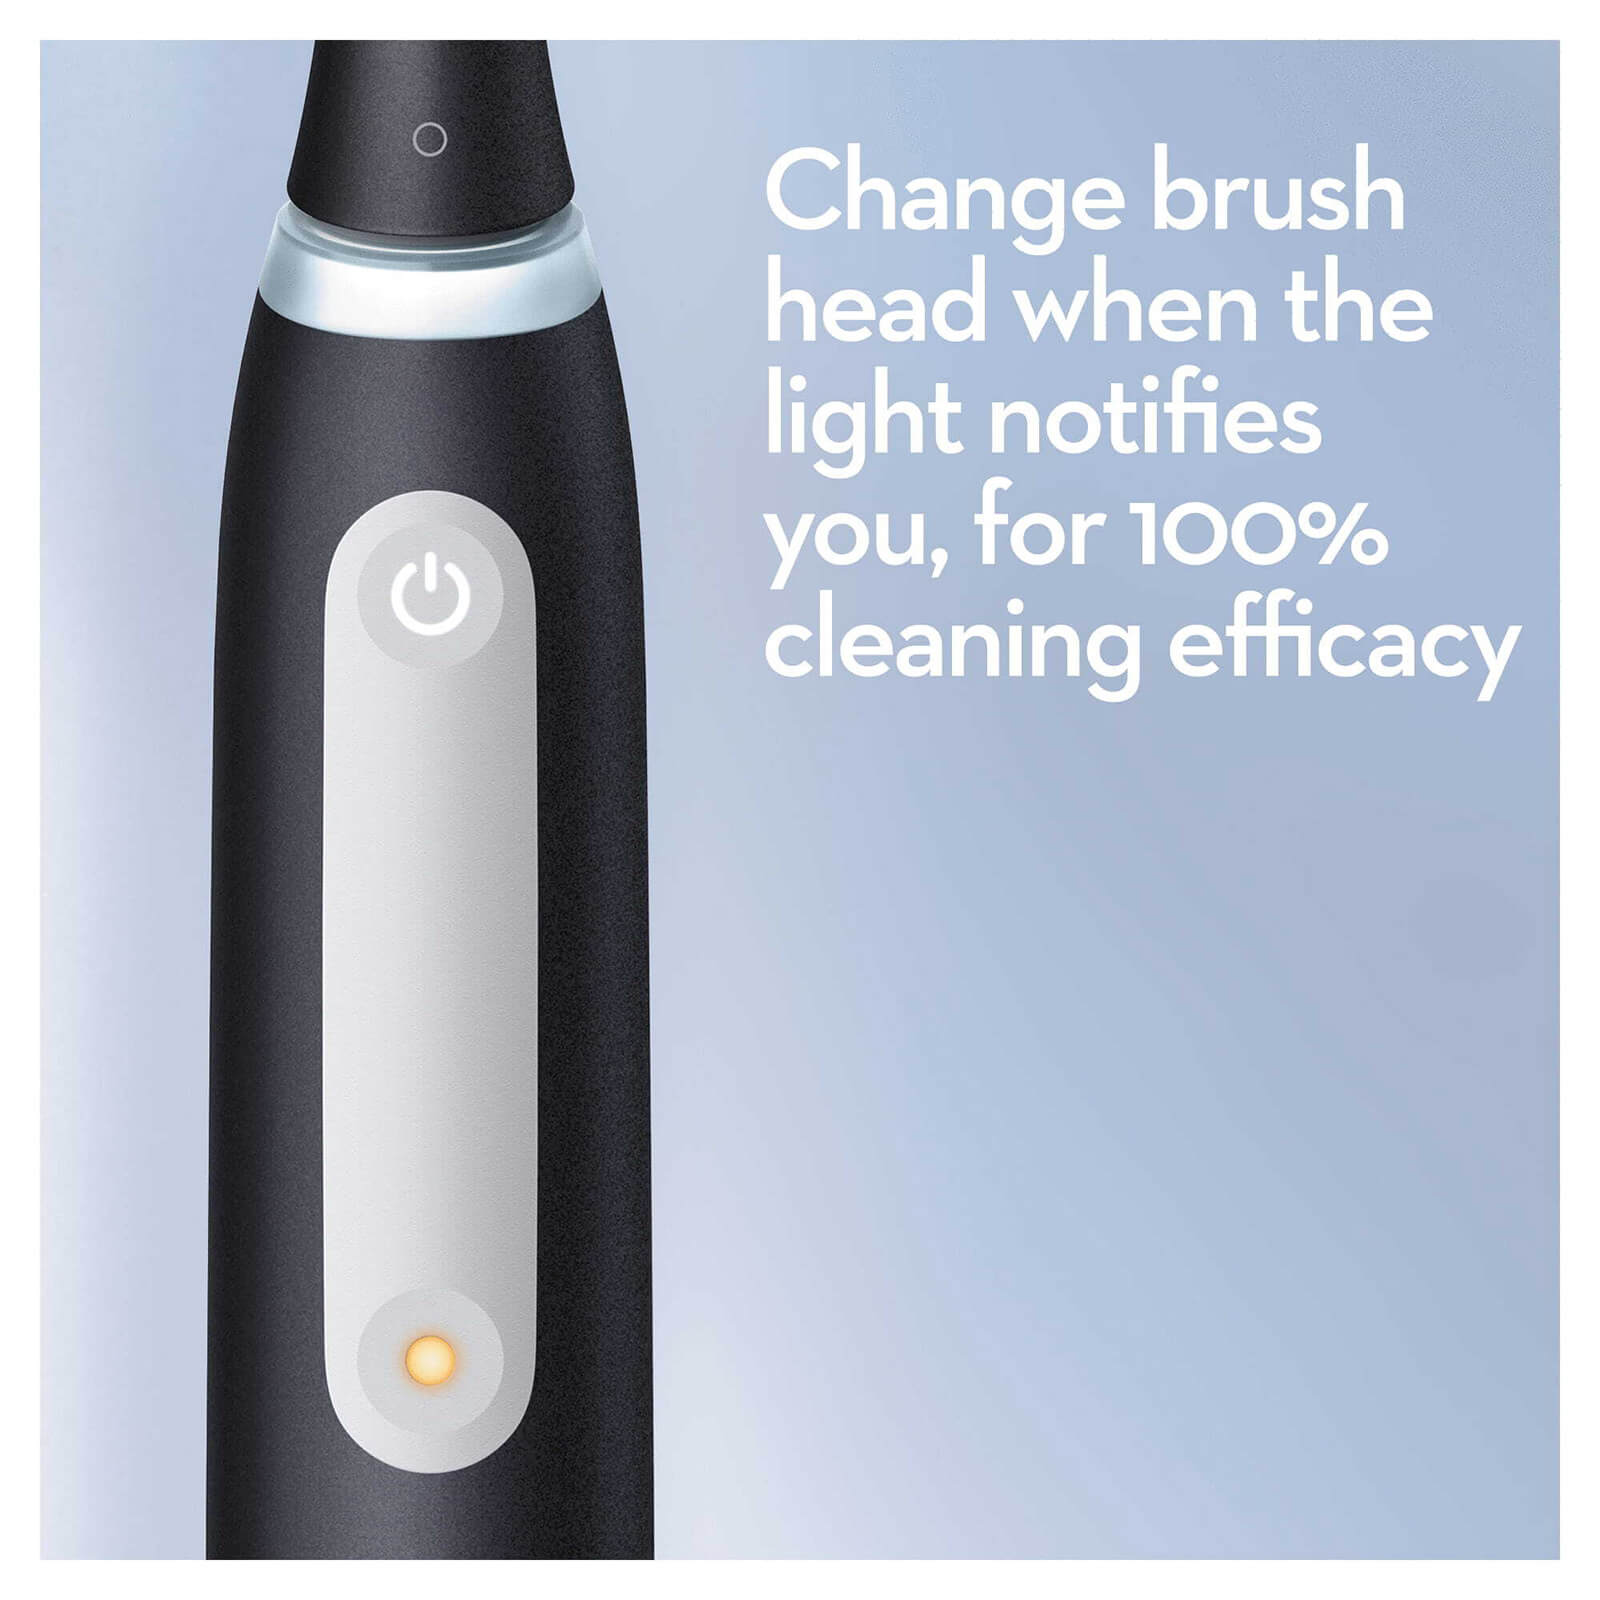 change brush head when the light notifies you, for 100% cleaning efficacy